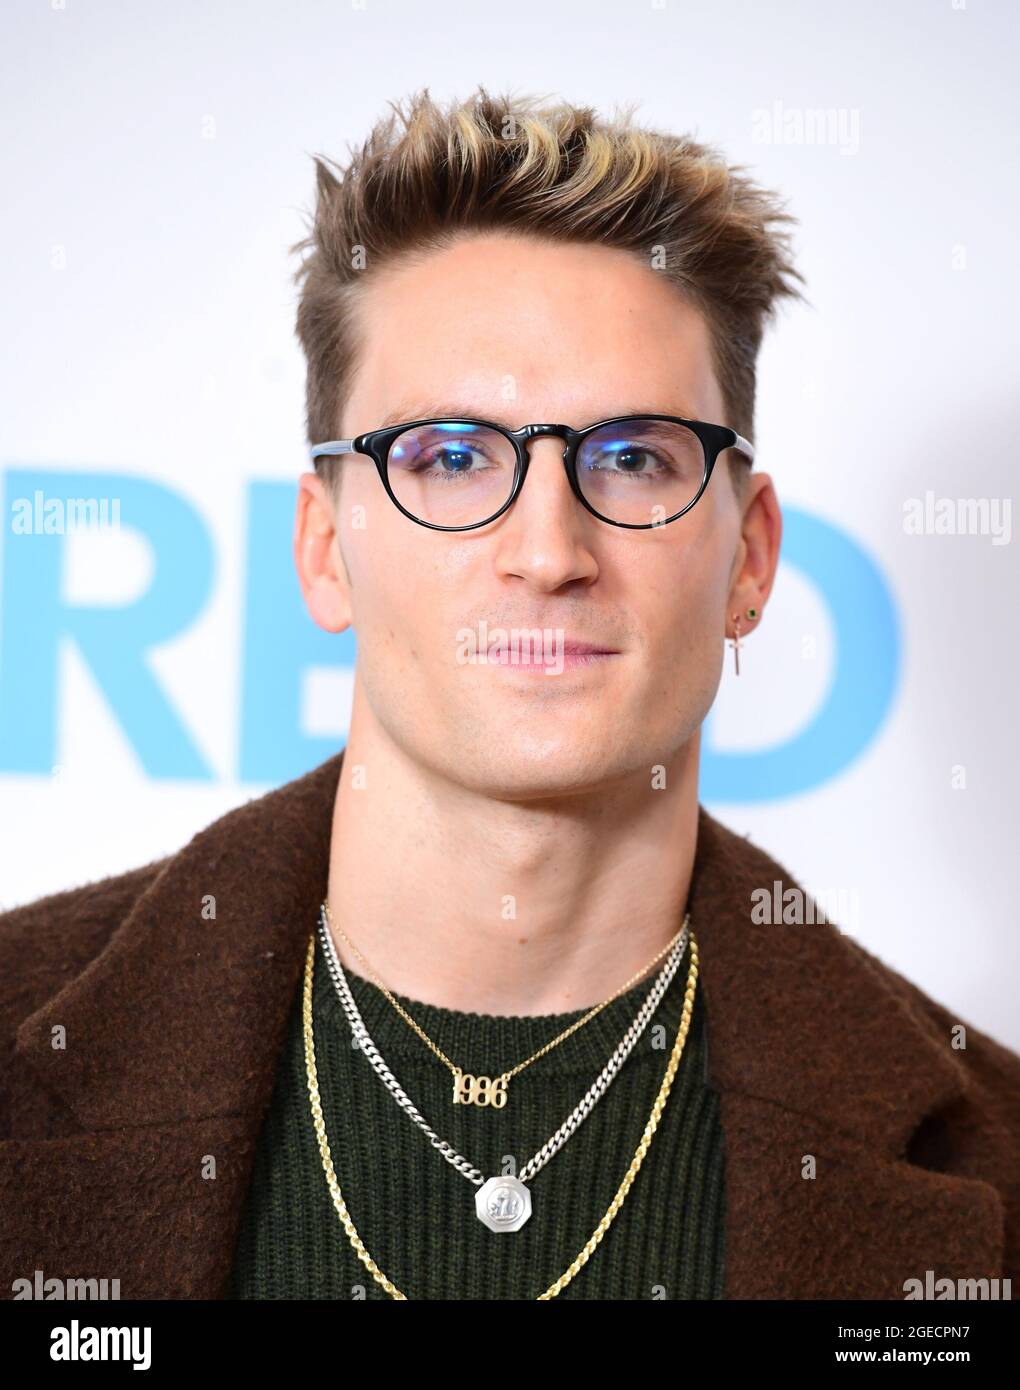 File photo dated 13/02/20 of Oliver Proudlock who has apologised and said he is "mortified by his actions" after appearing to refer to the Holocaust in a selfie he shared on Instagram. The 32-year-old reality TV personality faced a backlash after he posted a photo from his holiday in Greece, captioned "Boy in the stripe pyjamas". Stock Photo